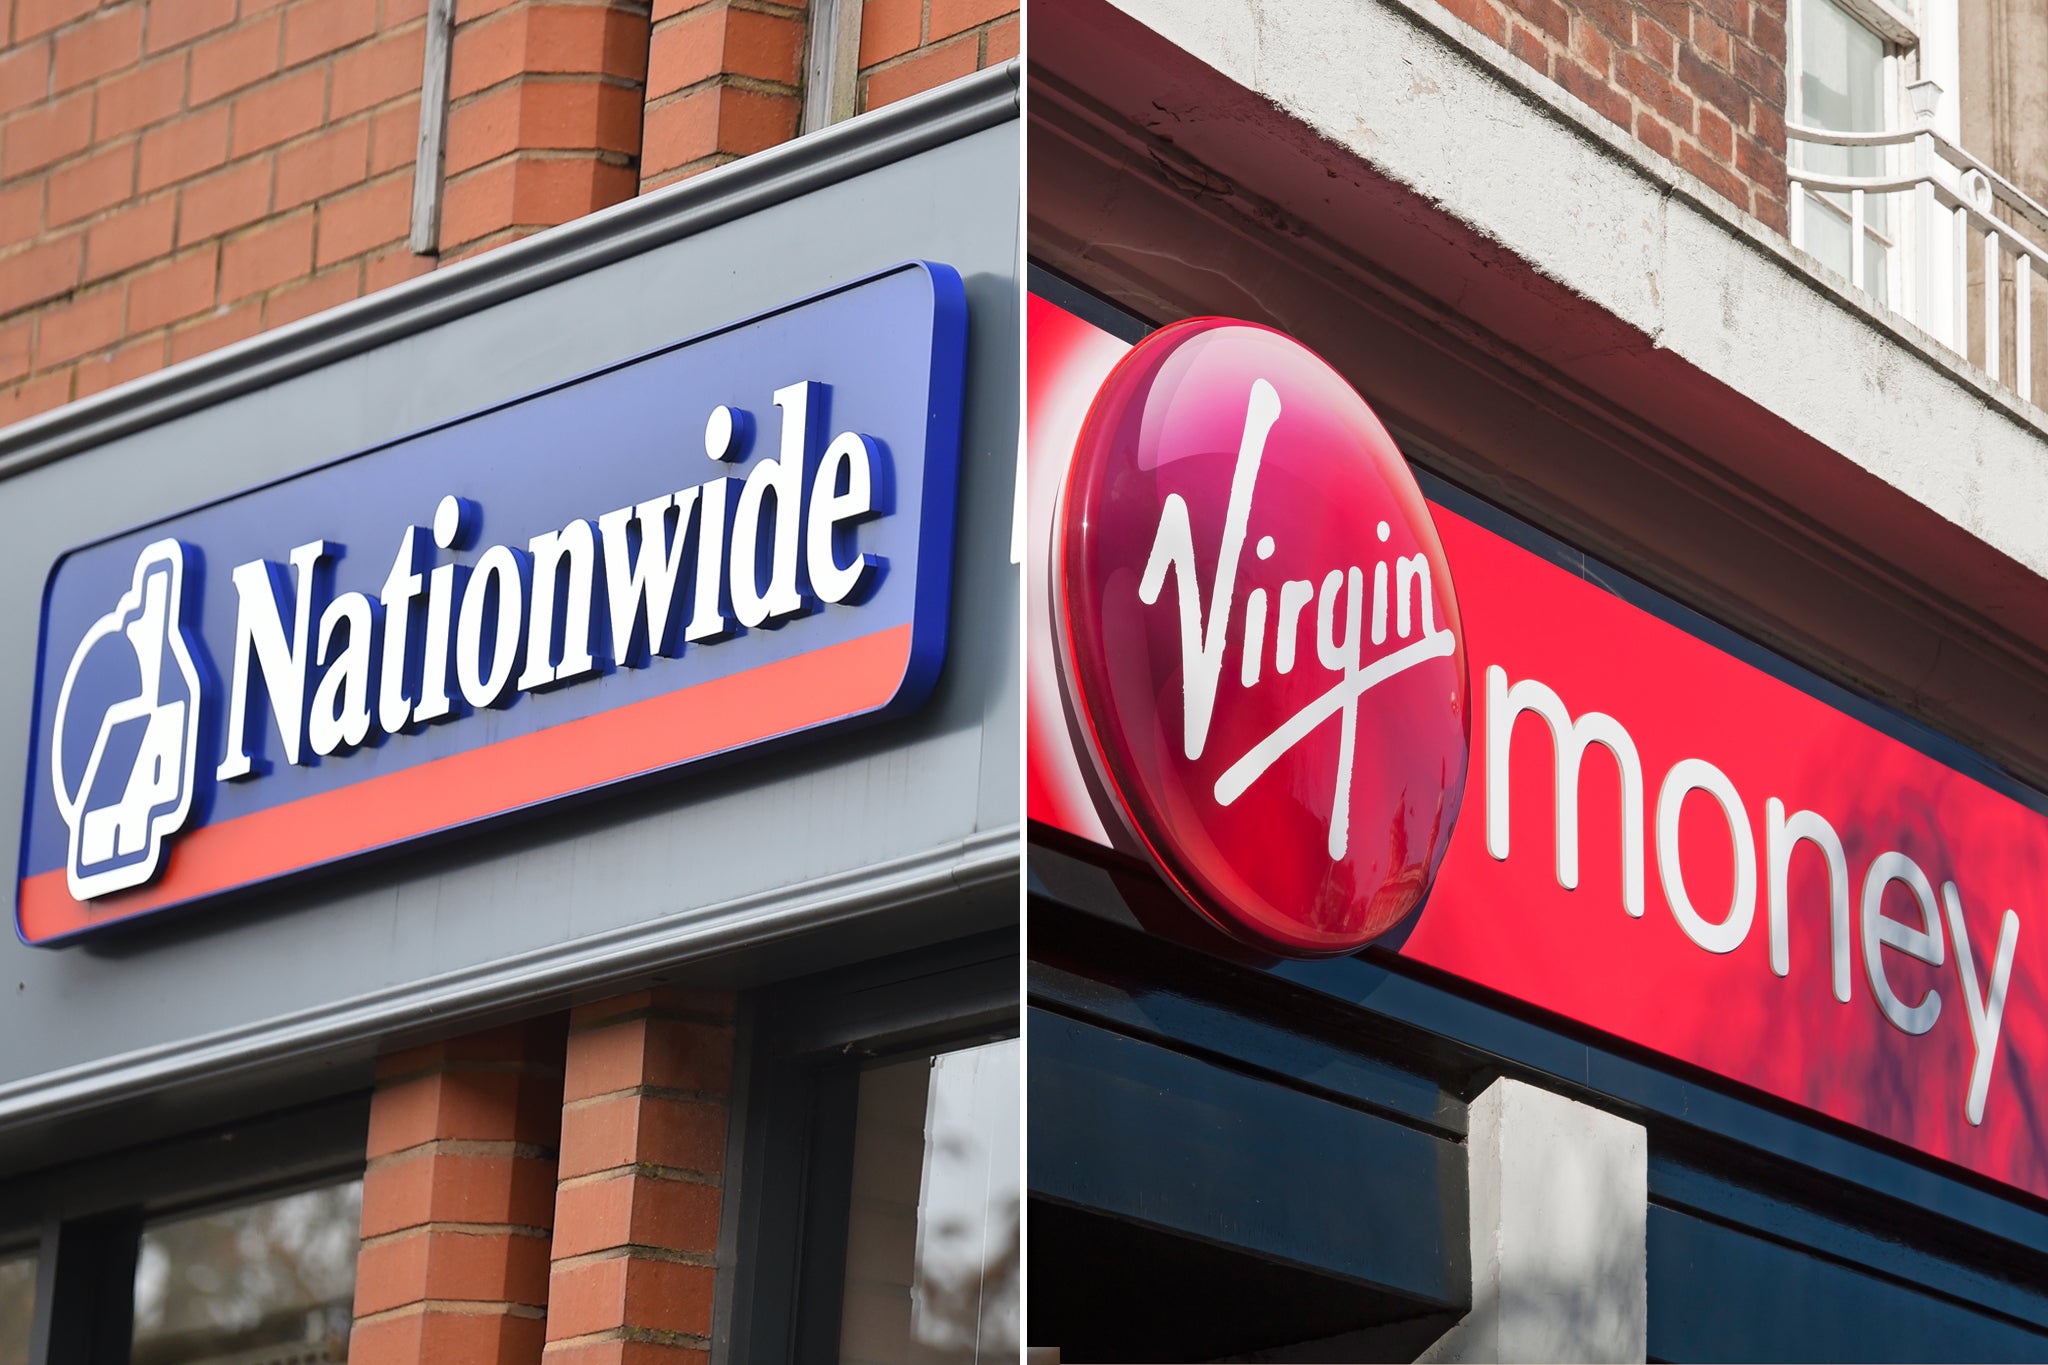 Nationwide has agreed to buy Virgin Money for £2.9bn